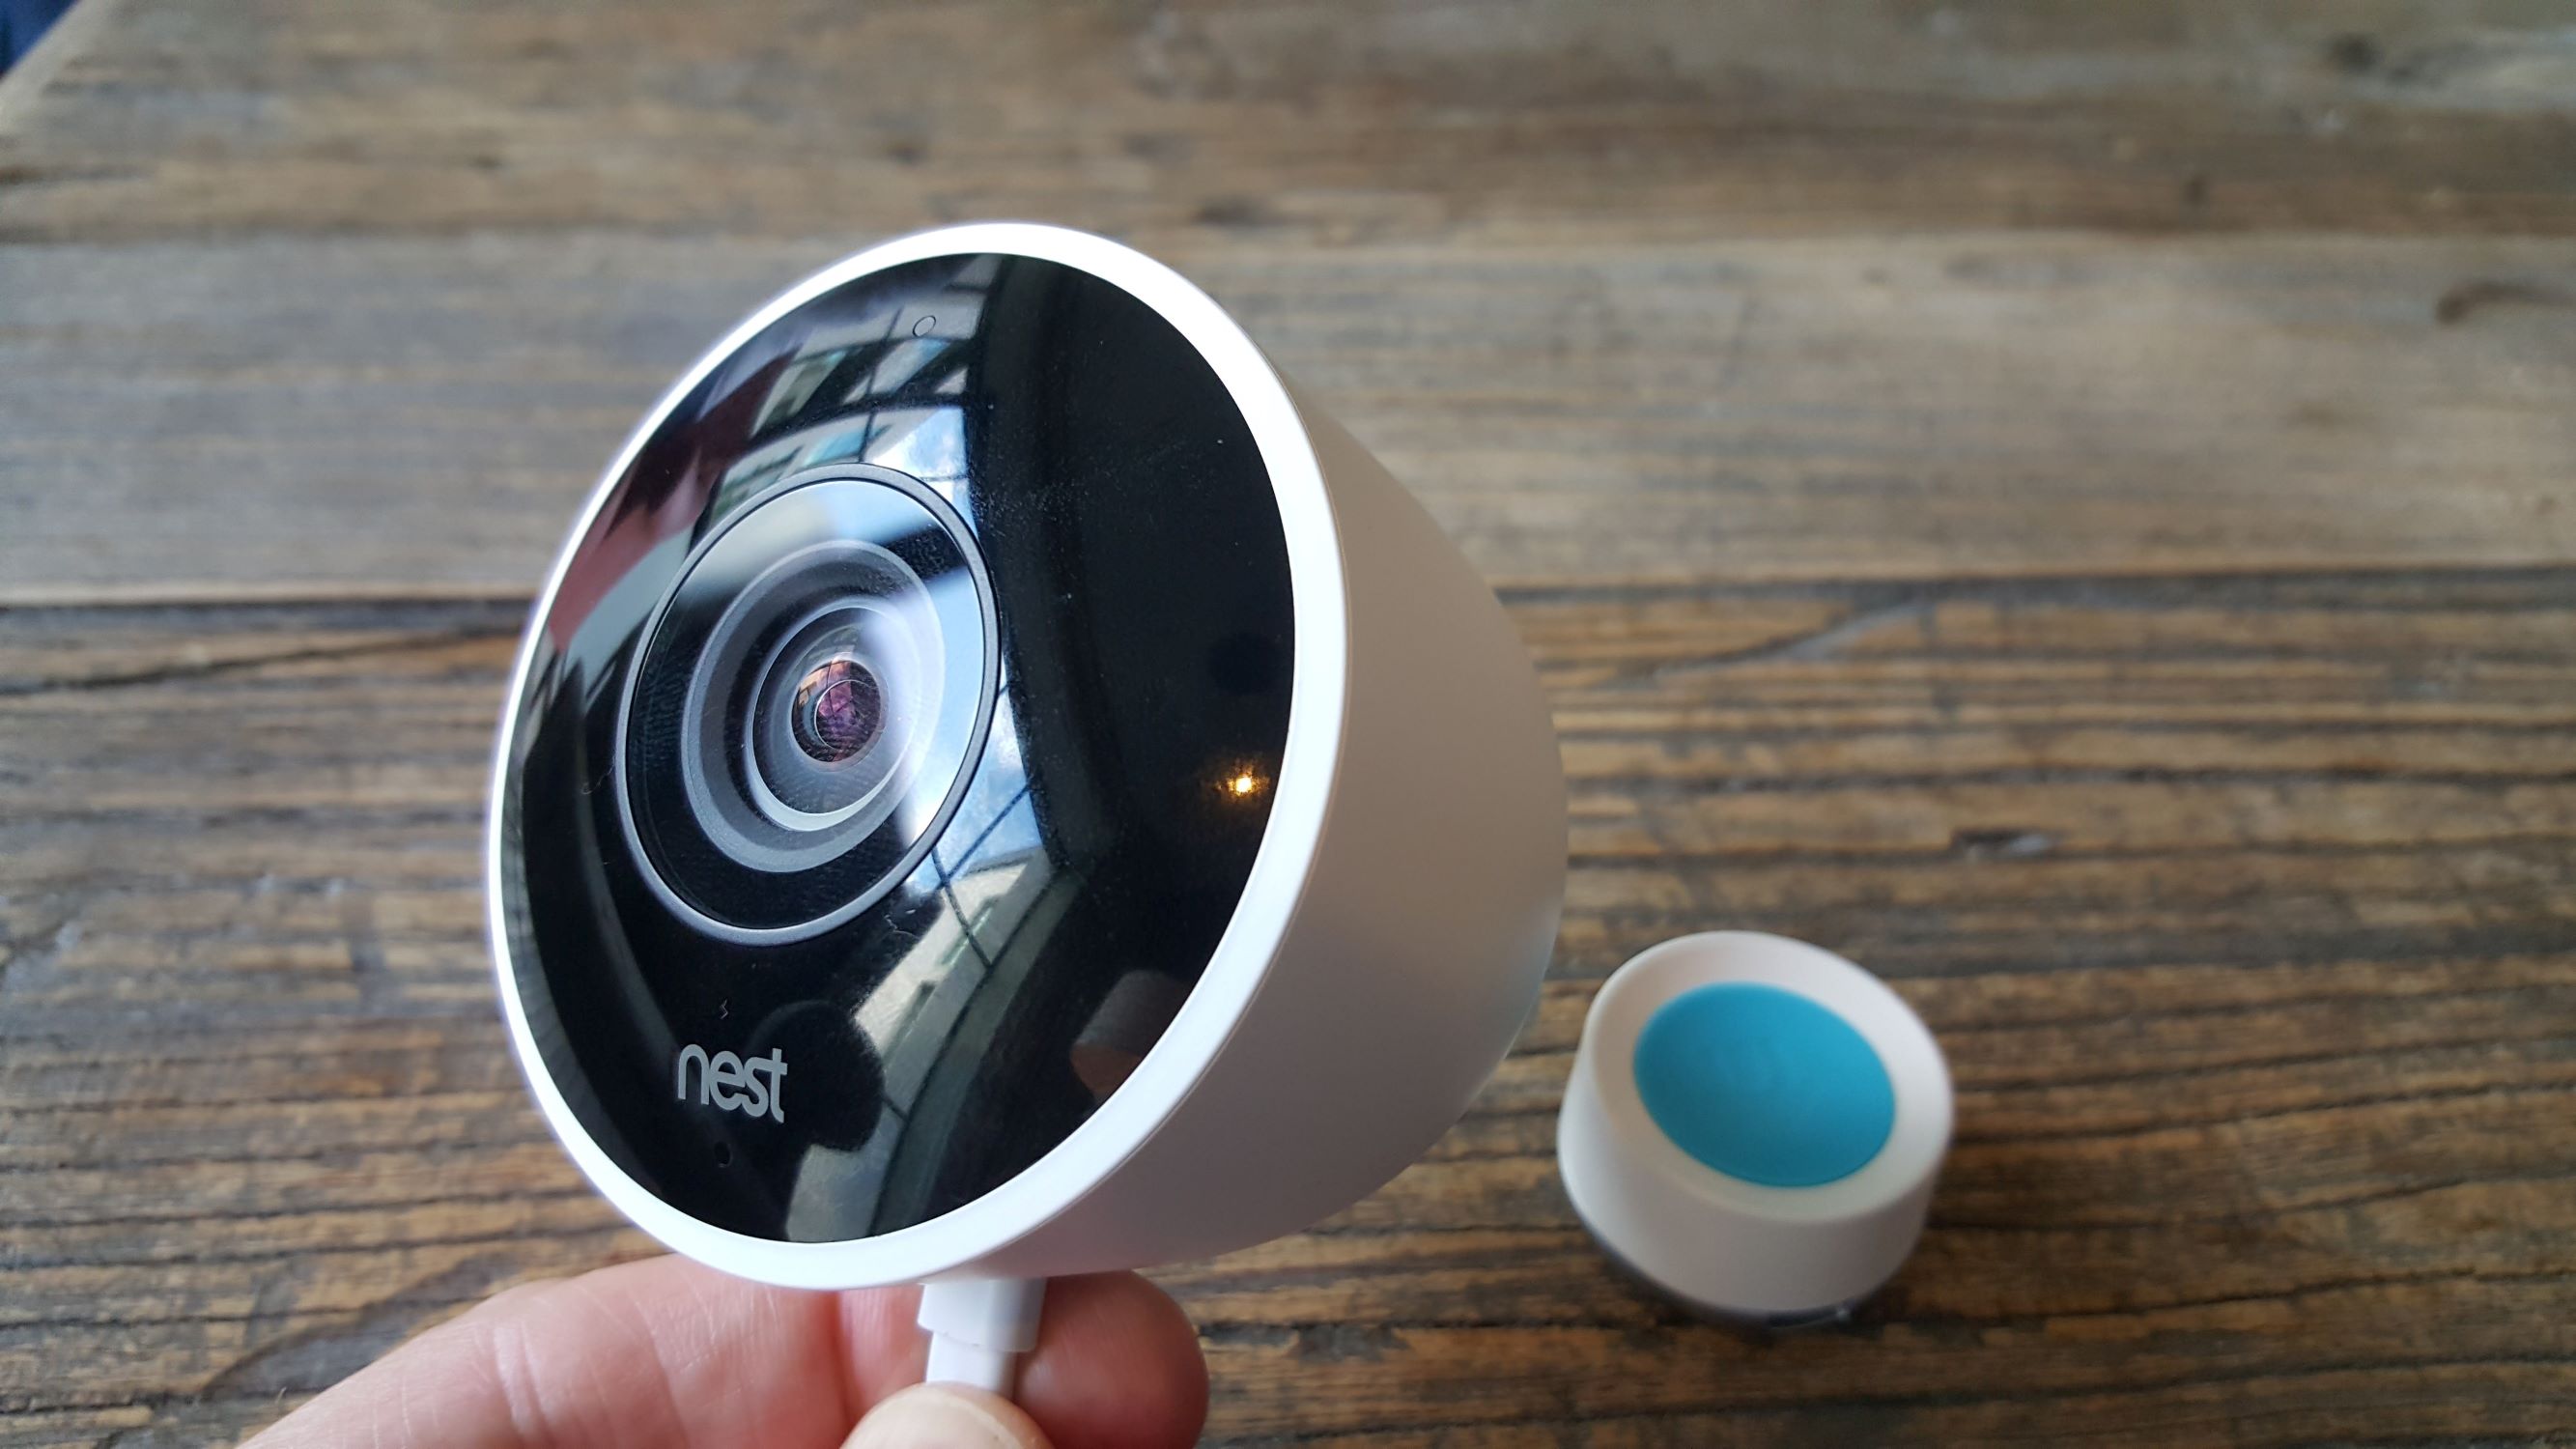 How Does The Magnet Work With A Nest Outdoor Camera